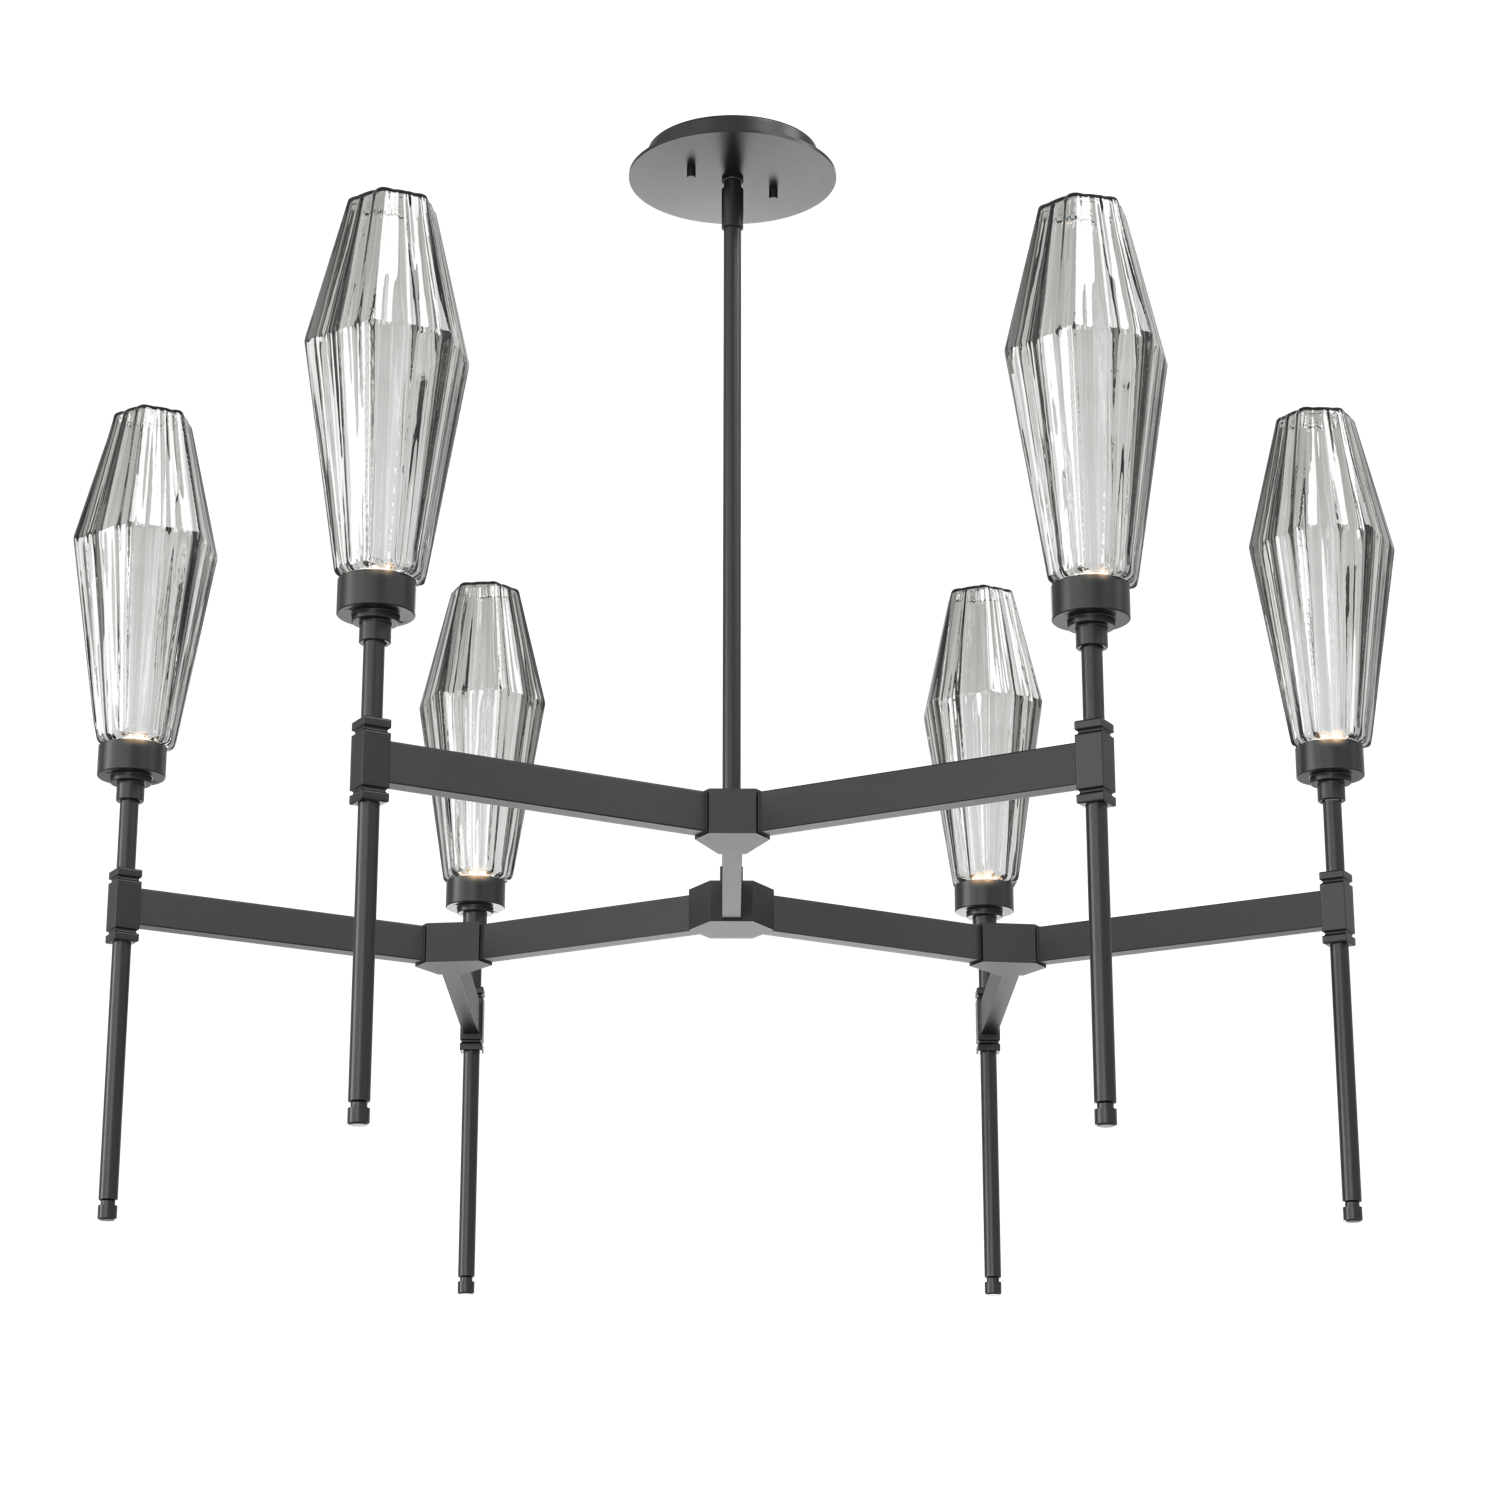 CHB0049-37-MB-RS-Hammerton-Studio-Aalto-37-inch-round-belvedere-chandelier-with-matte-black-finish-and-optic-ribbed-smoke-glass-shades-and-LED-lamping